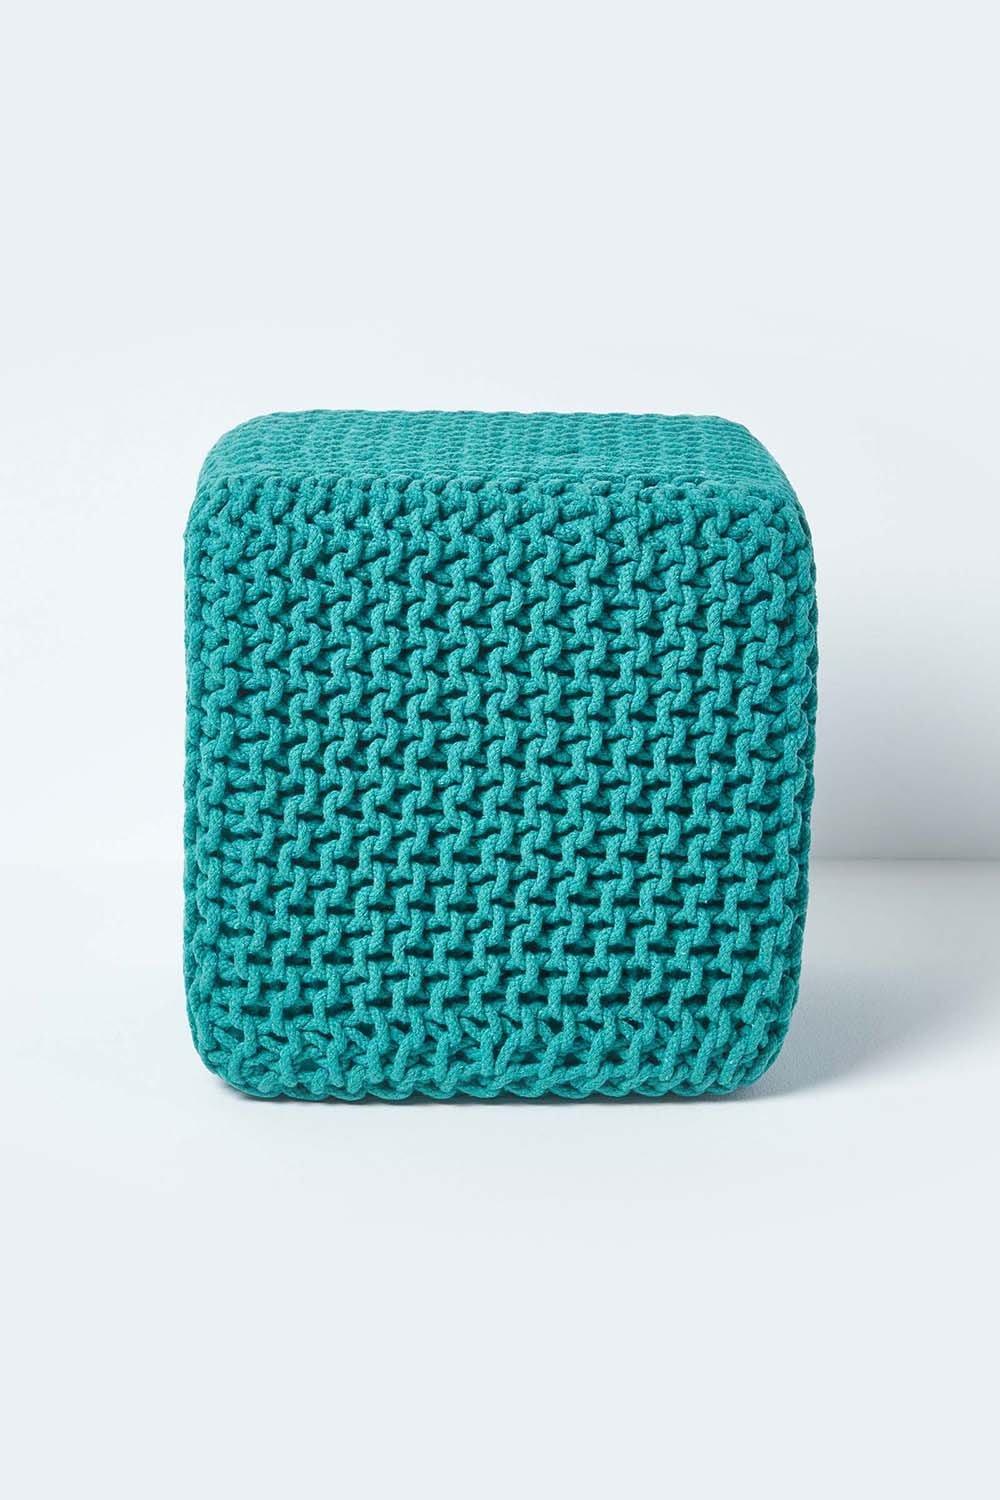 Homescapes Cube Cotton Knitted Pouffe Footstool|green